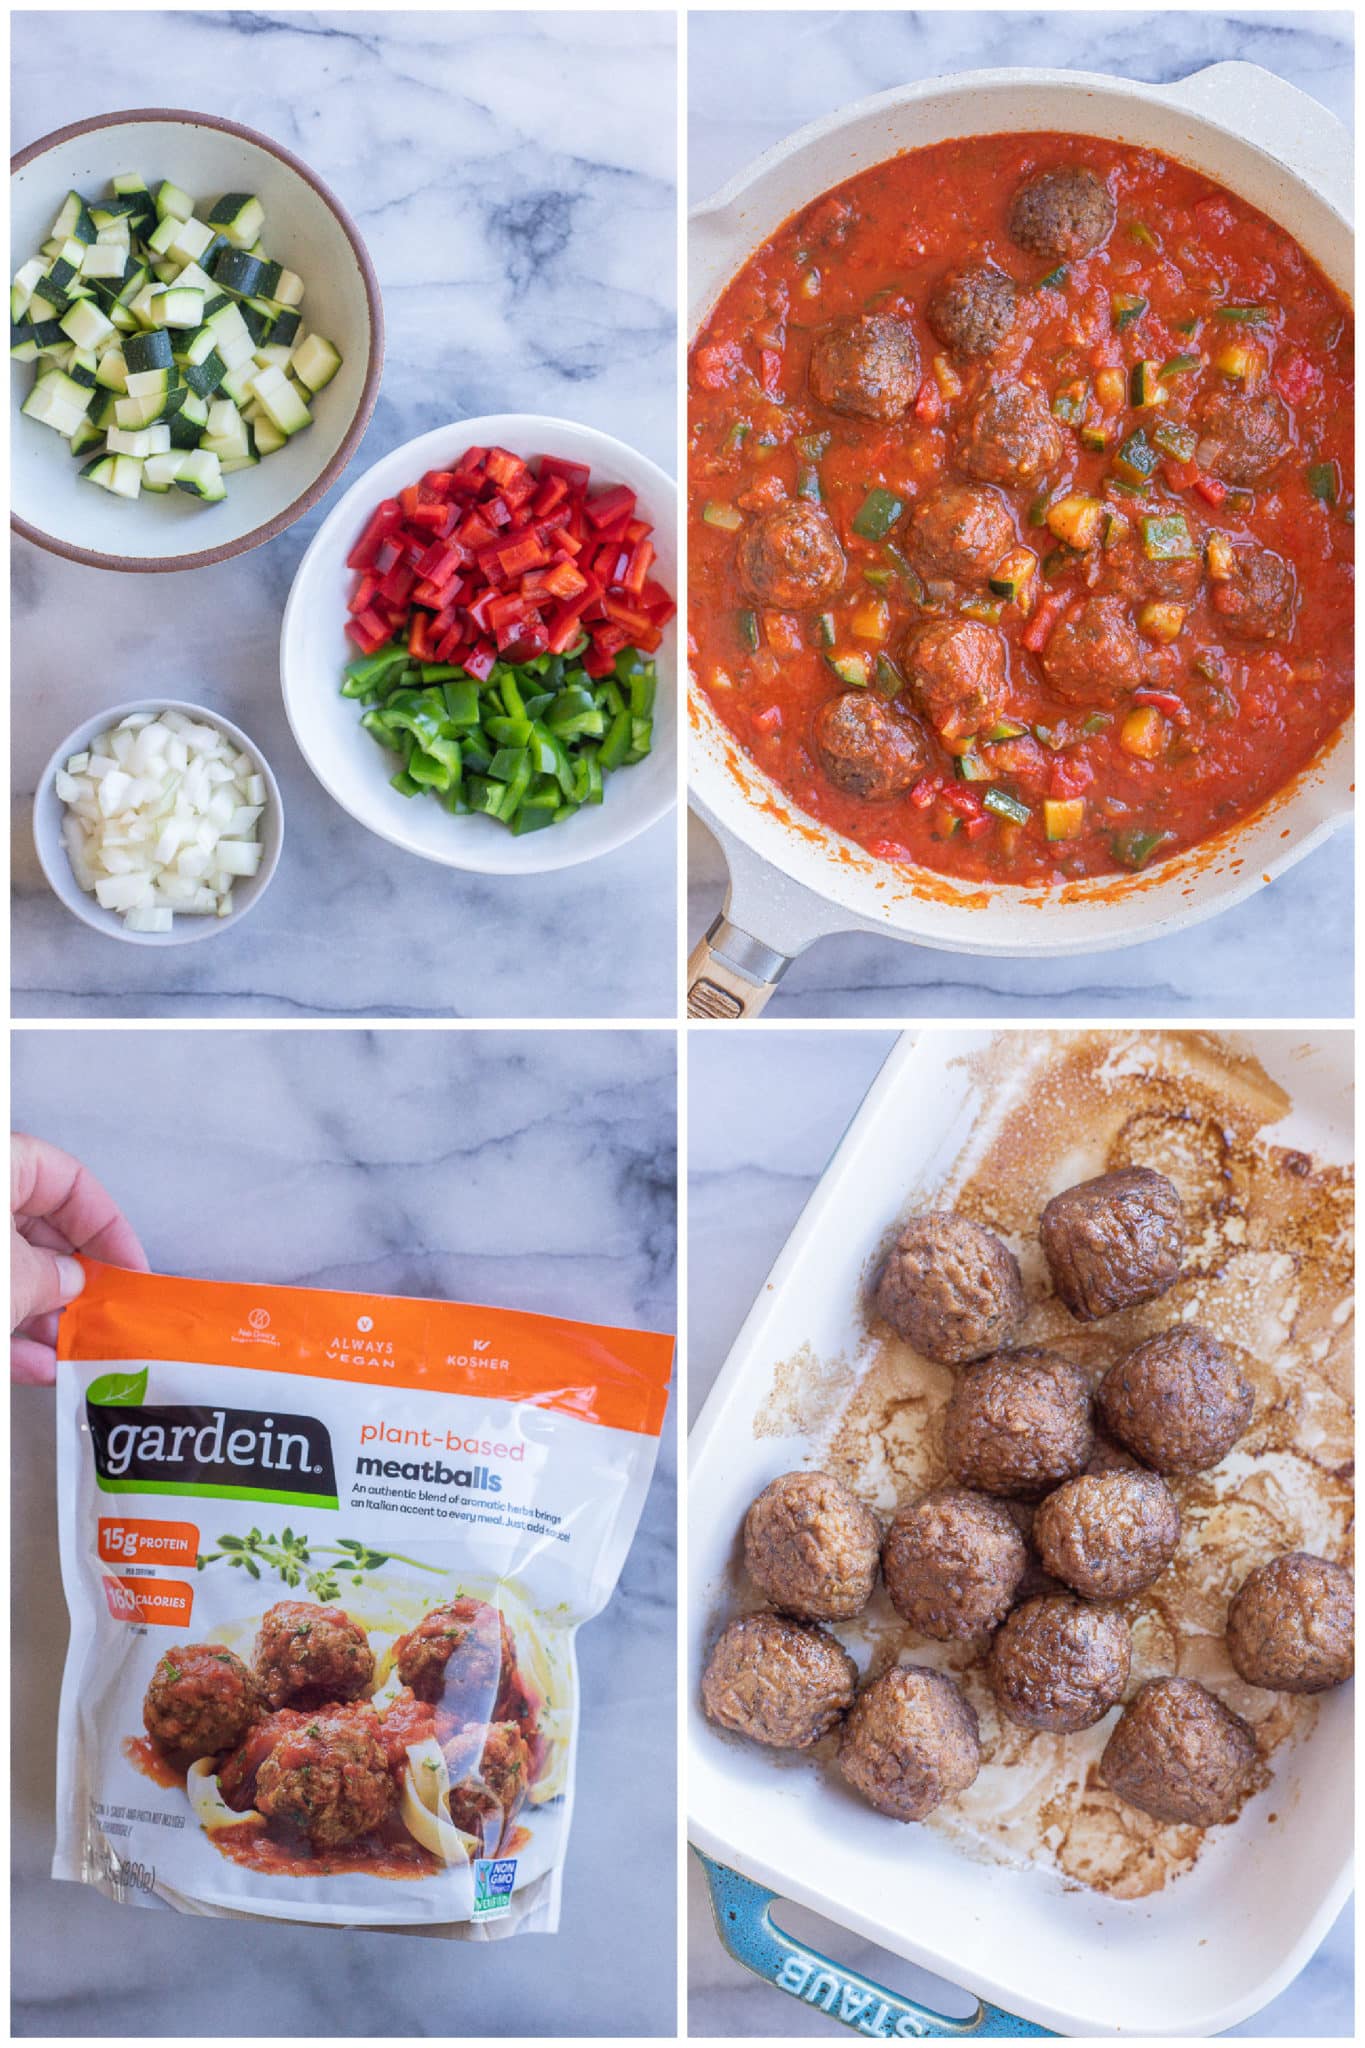 showing all the ingredients needed in order to make these vegetarian meatball subs